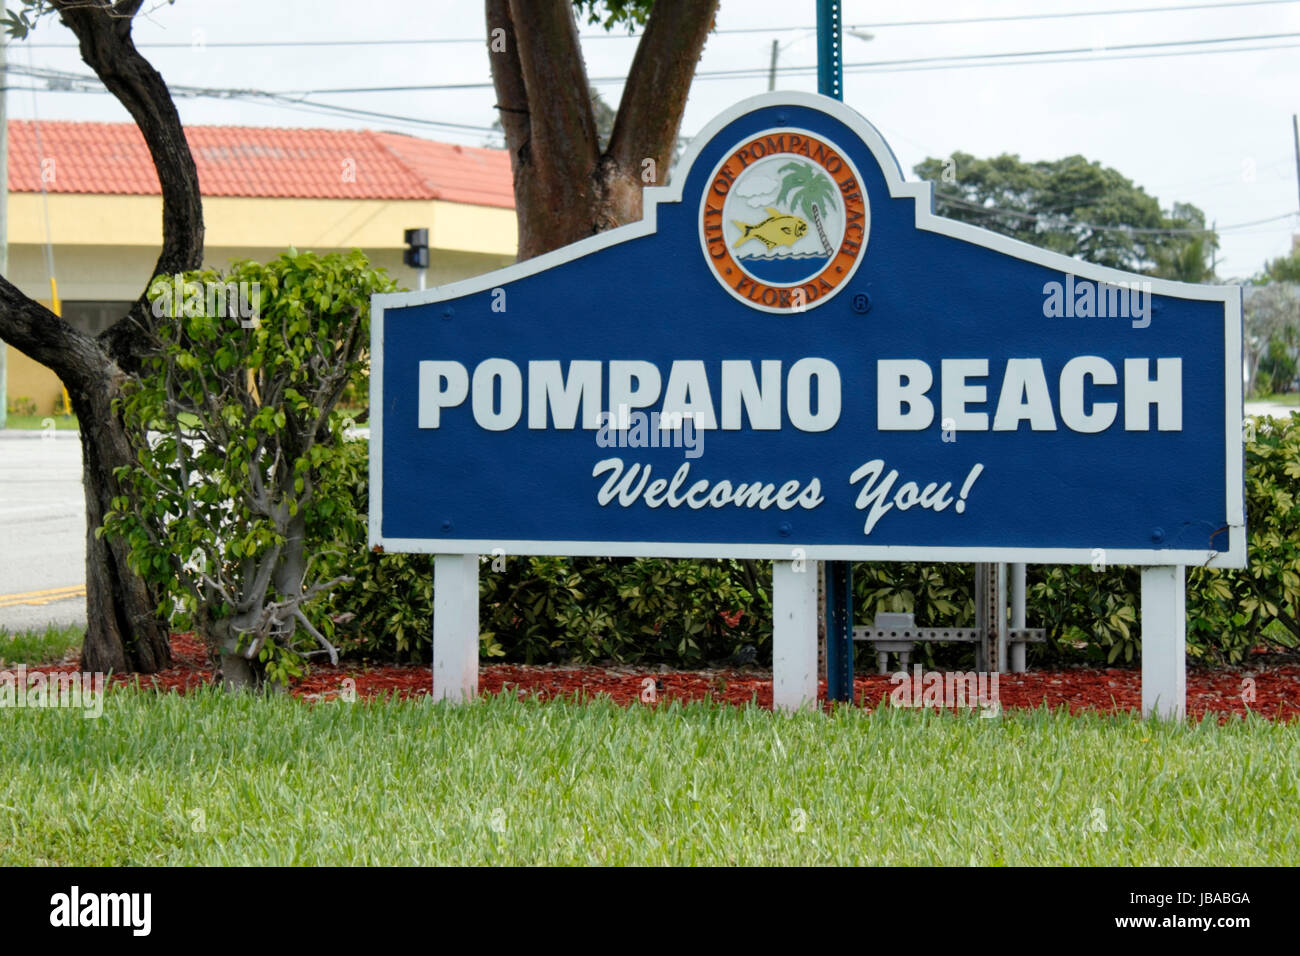 POMPANO BEACH, FLORIDA - JULY 1, 2013: Large white and blue welcome sign at the entrance to the City of Pompano Beach, Florida, population of 102,984 in 2012, that has a colorful tropical graphic. Stock Photo